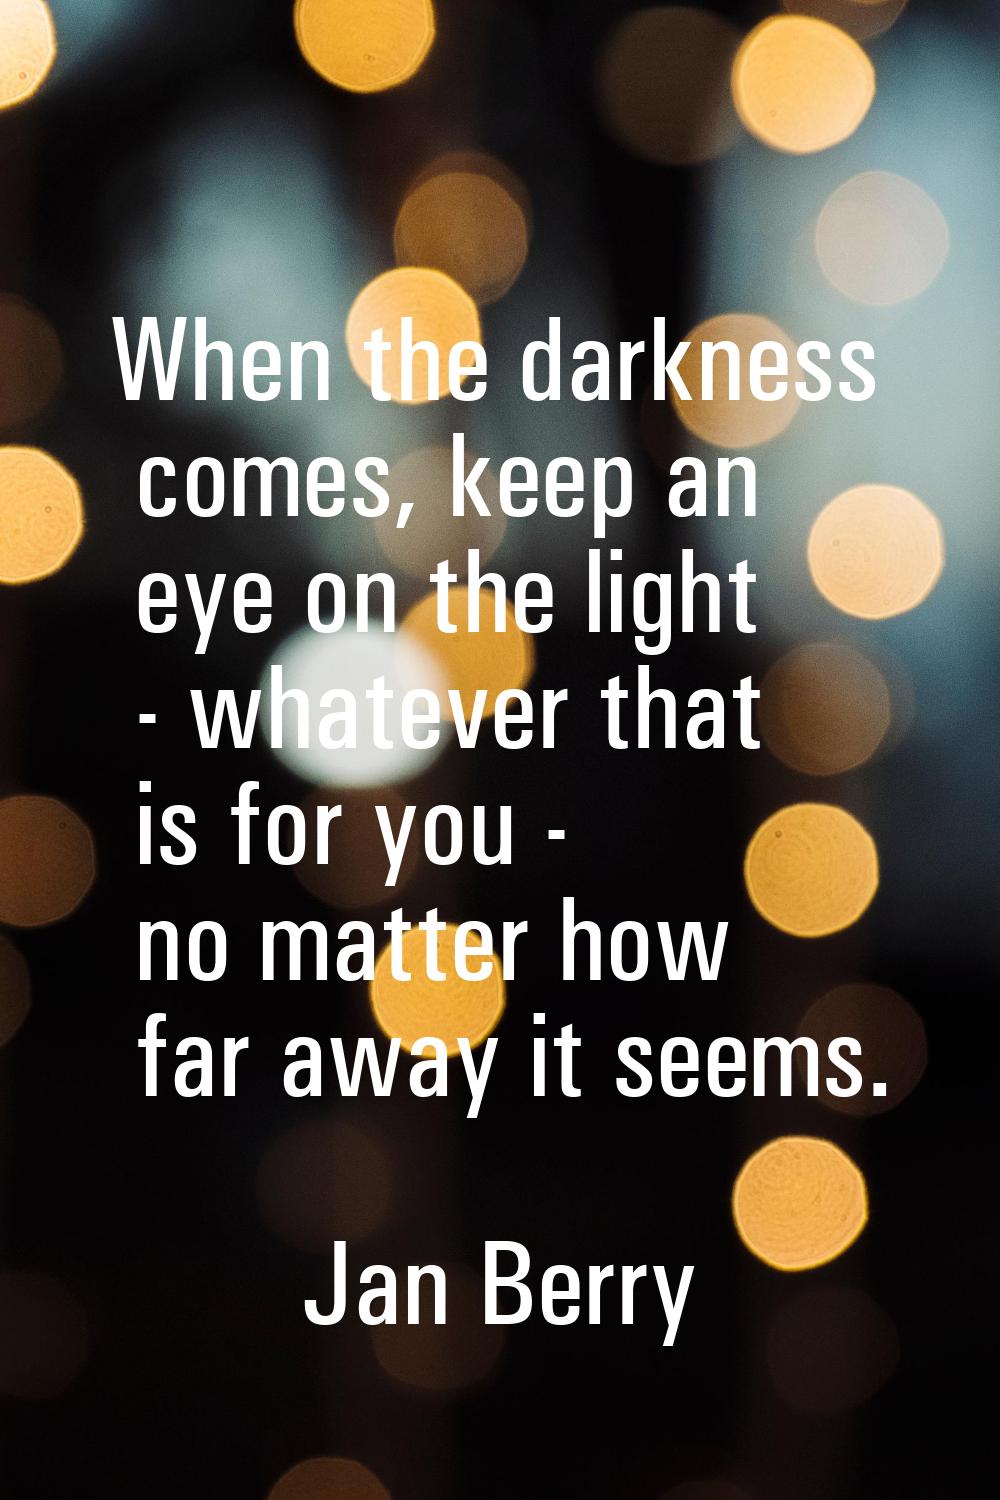 When the darkness comes, keep an eye on the light - whatever that is for you - no matter how far aw